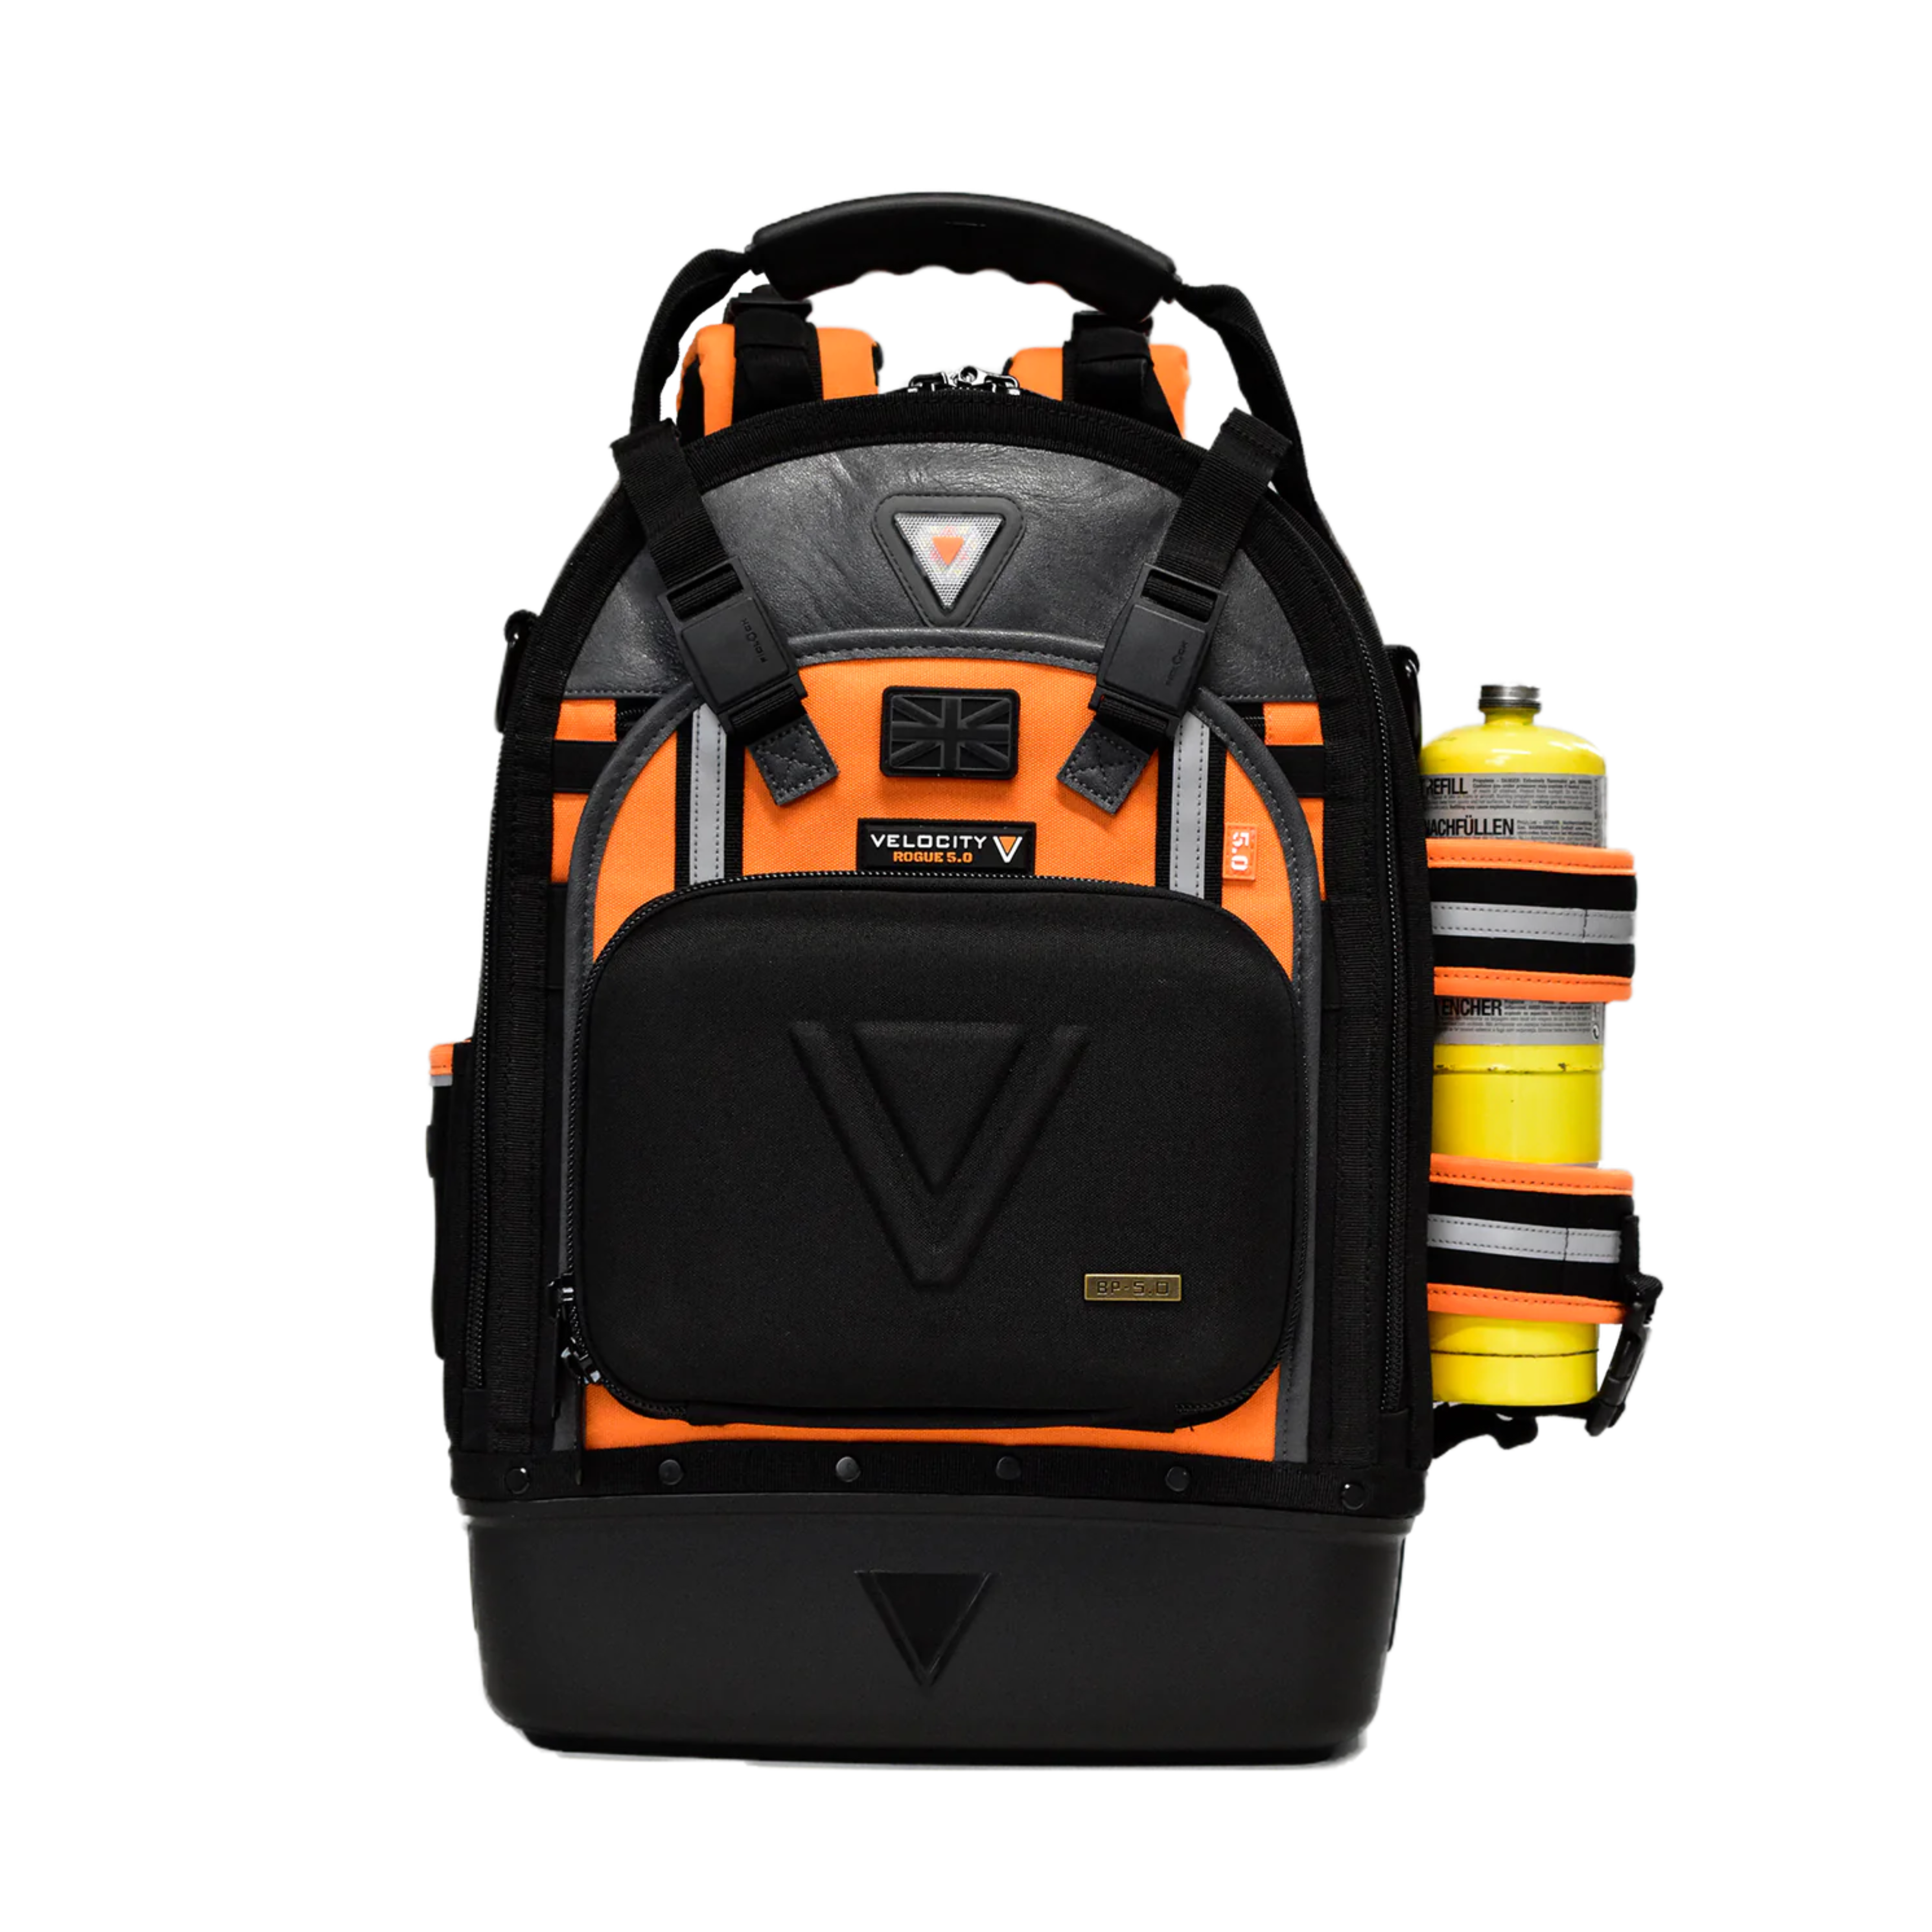 Rogue 5.0 Backpack